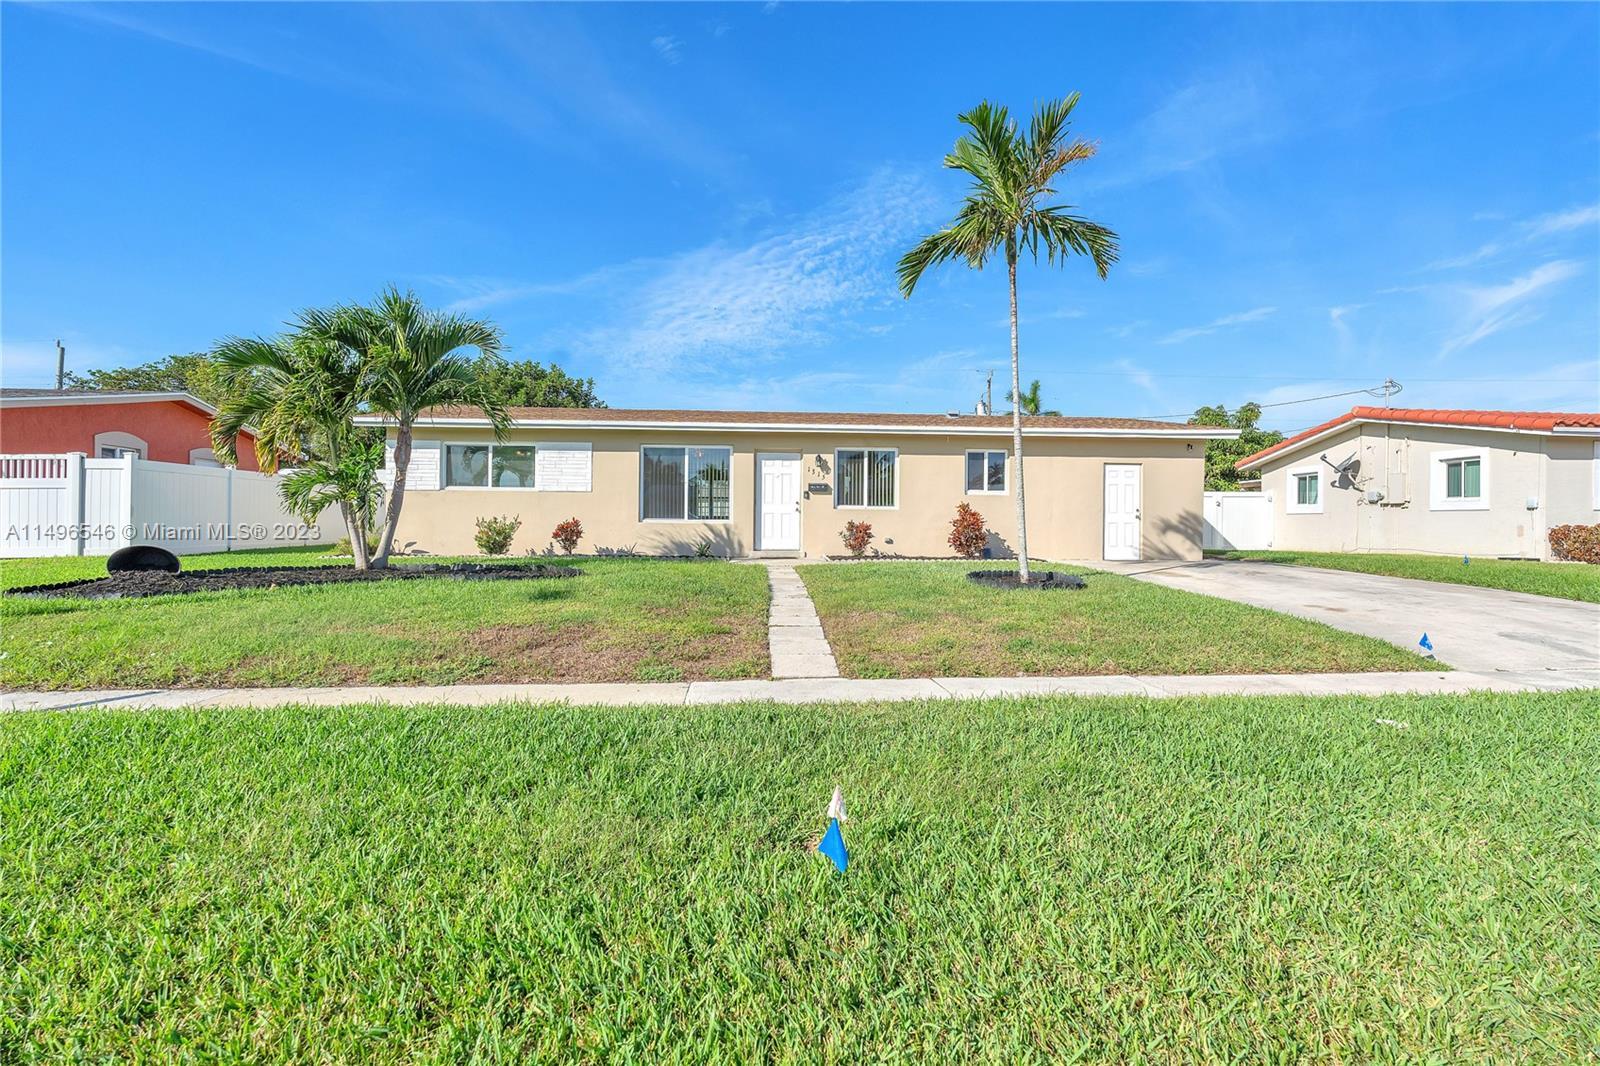 This home located in the desirable Fairlawn community of East Deerfield Beach is ready for its new h